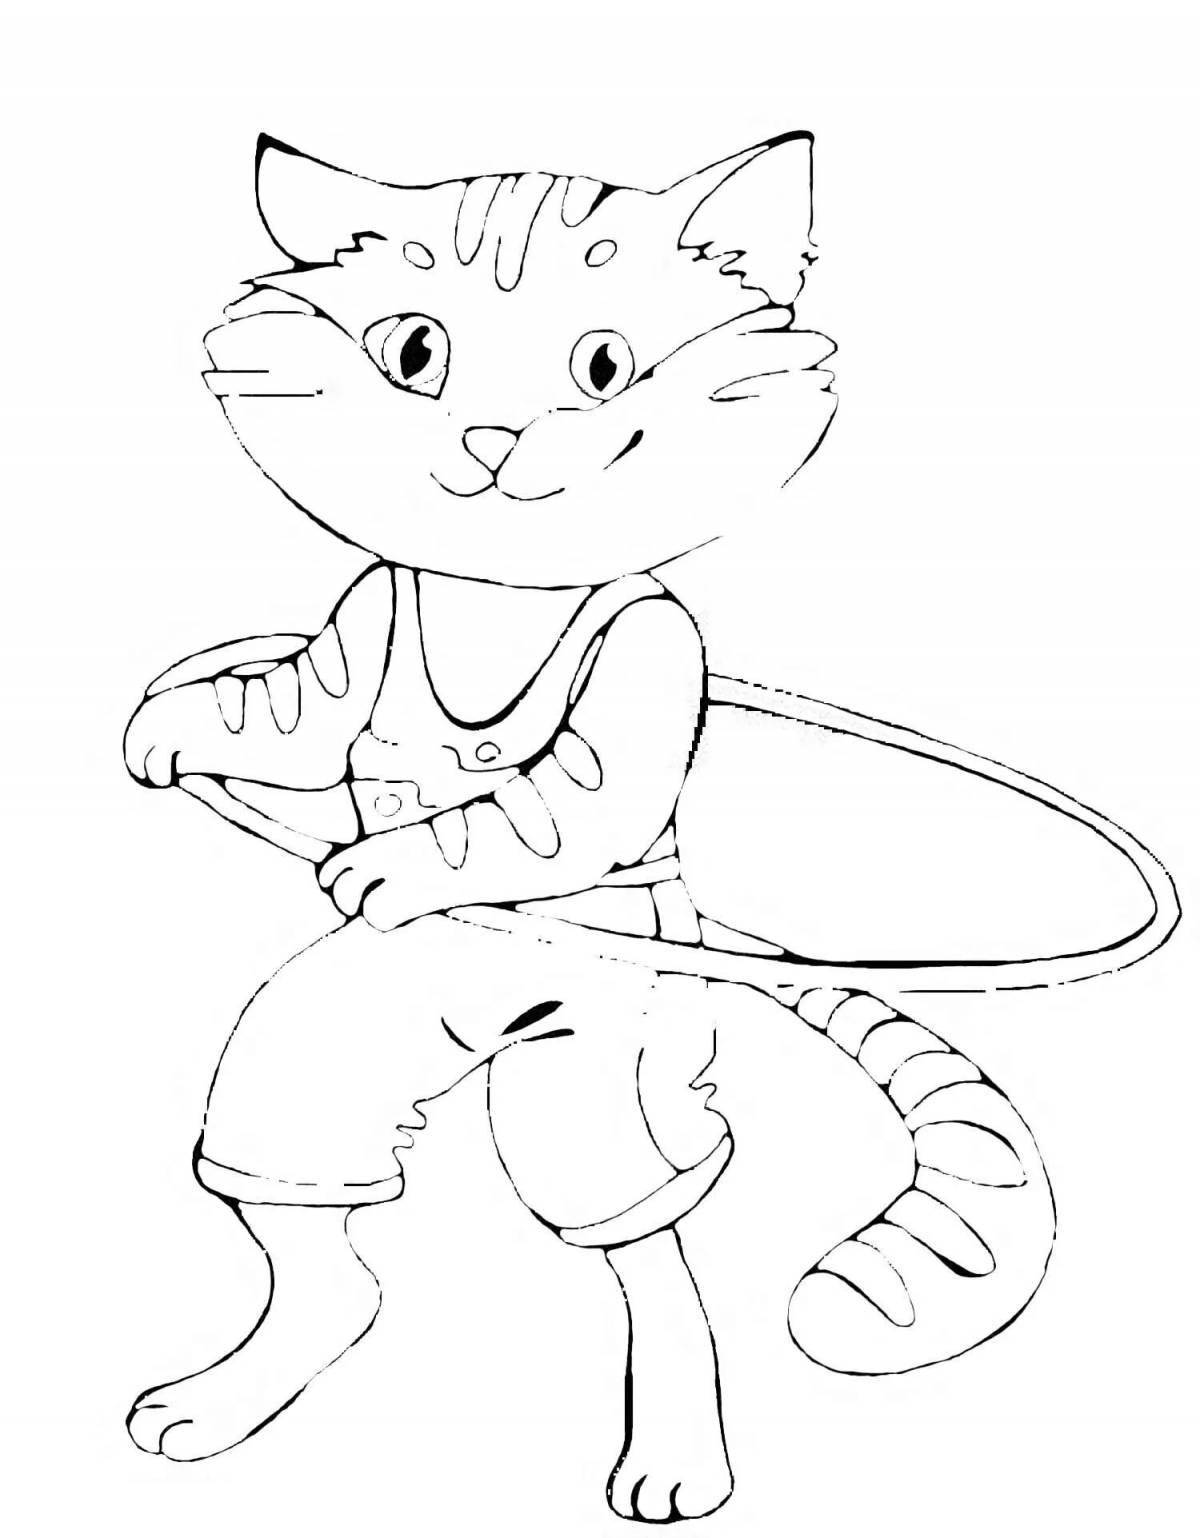 Coloring page friendly ginger cat